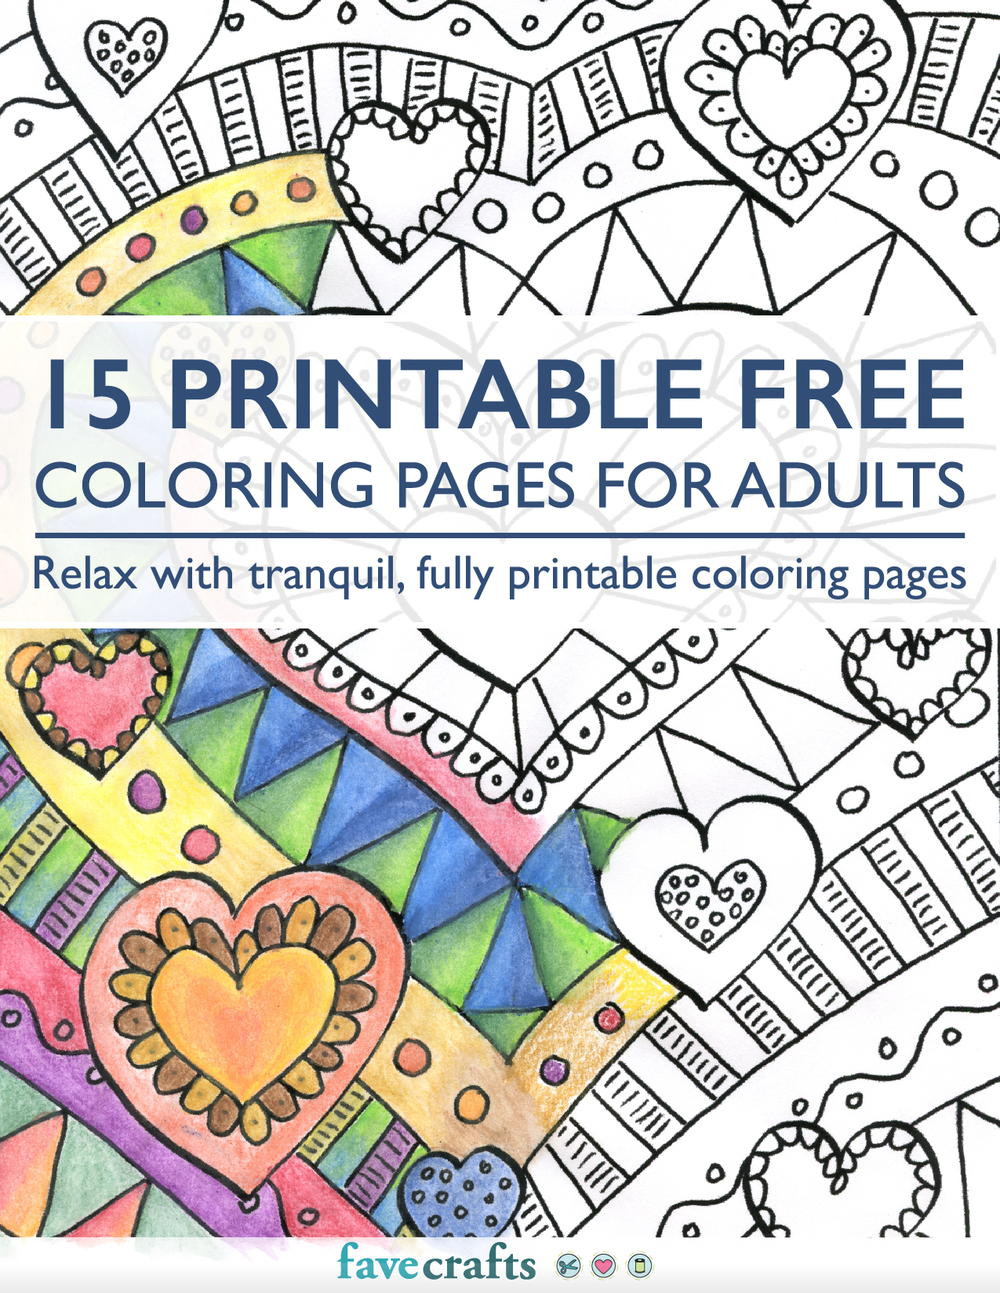 Online Adult Coloring Books
 15 Printable Free Coloring Pages for Adults [PDF